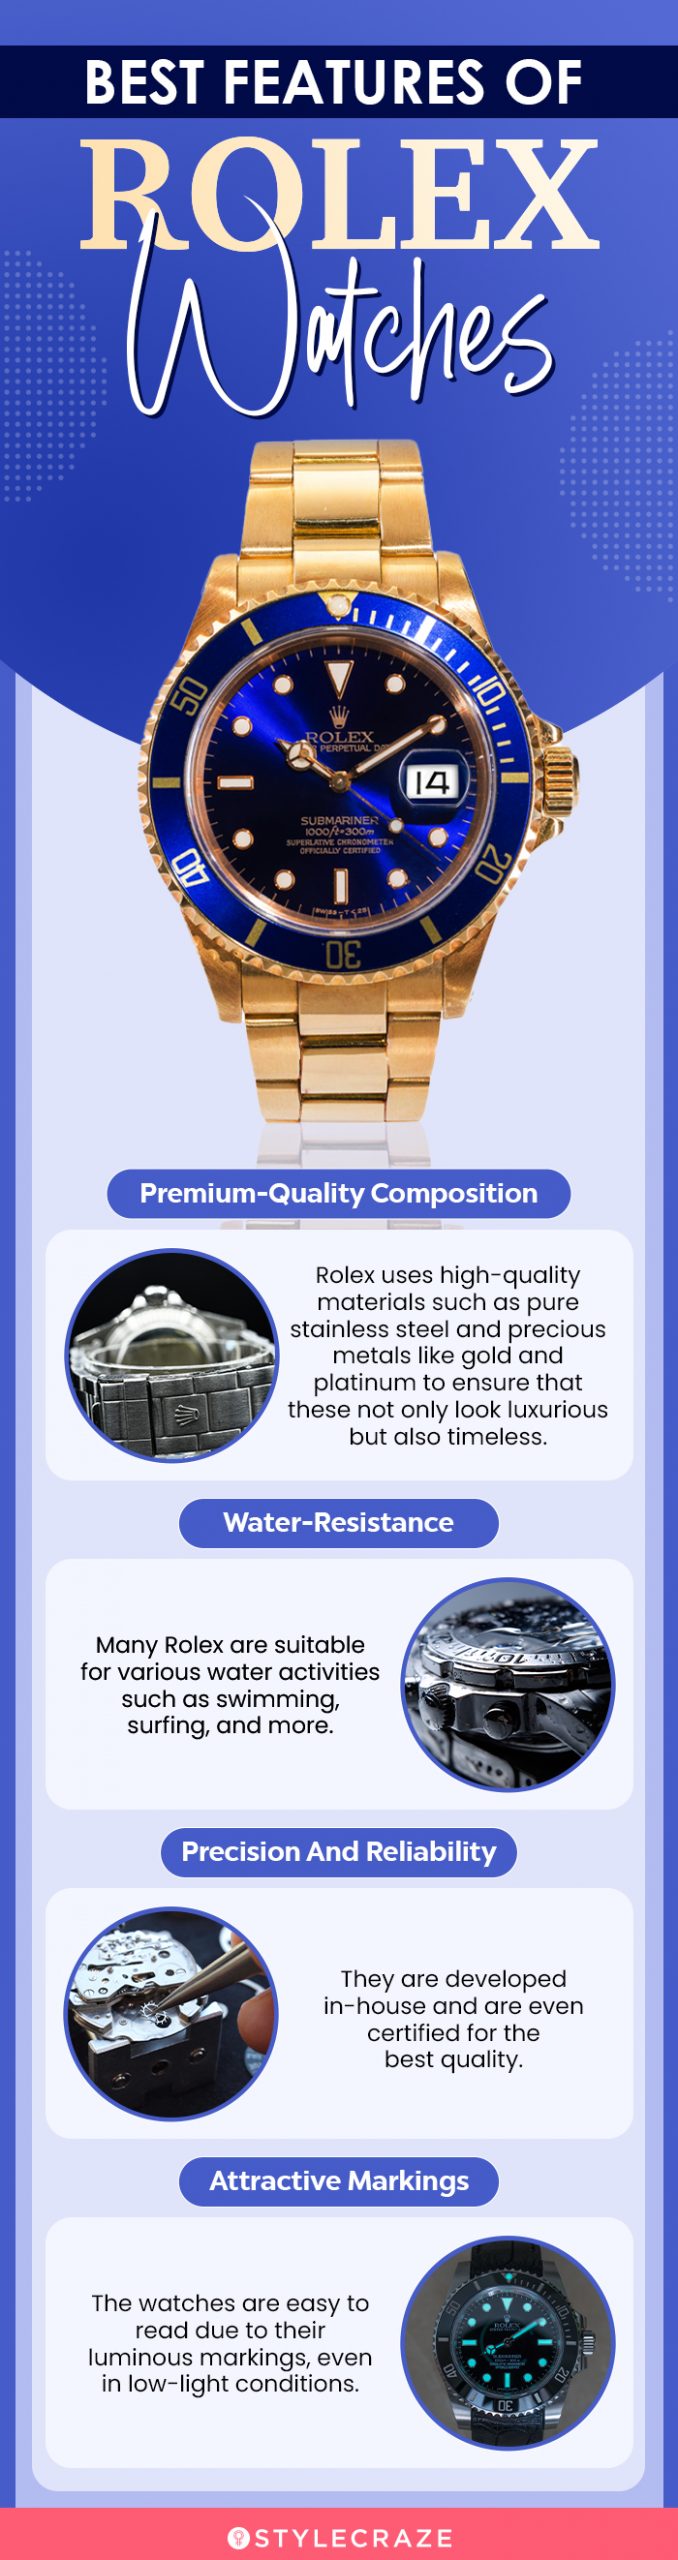 Best Features Of Rolex Watches(infographic)